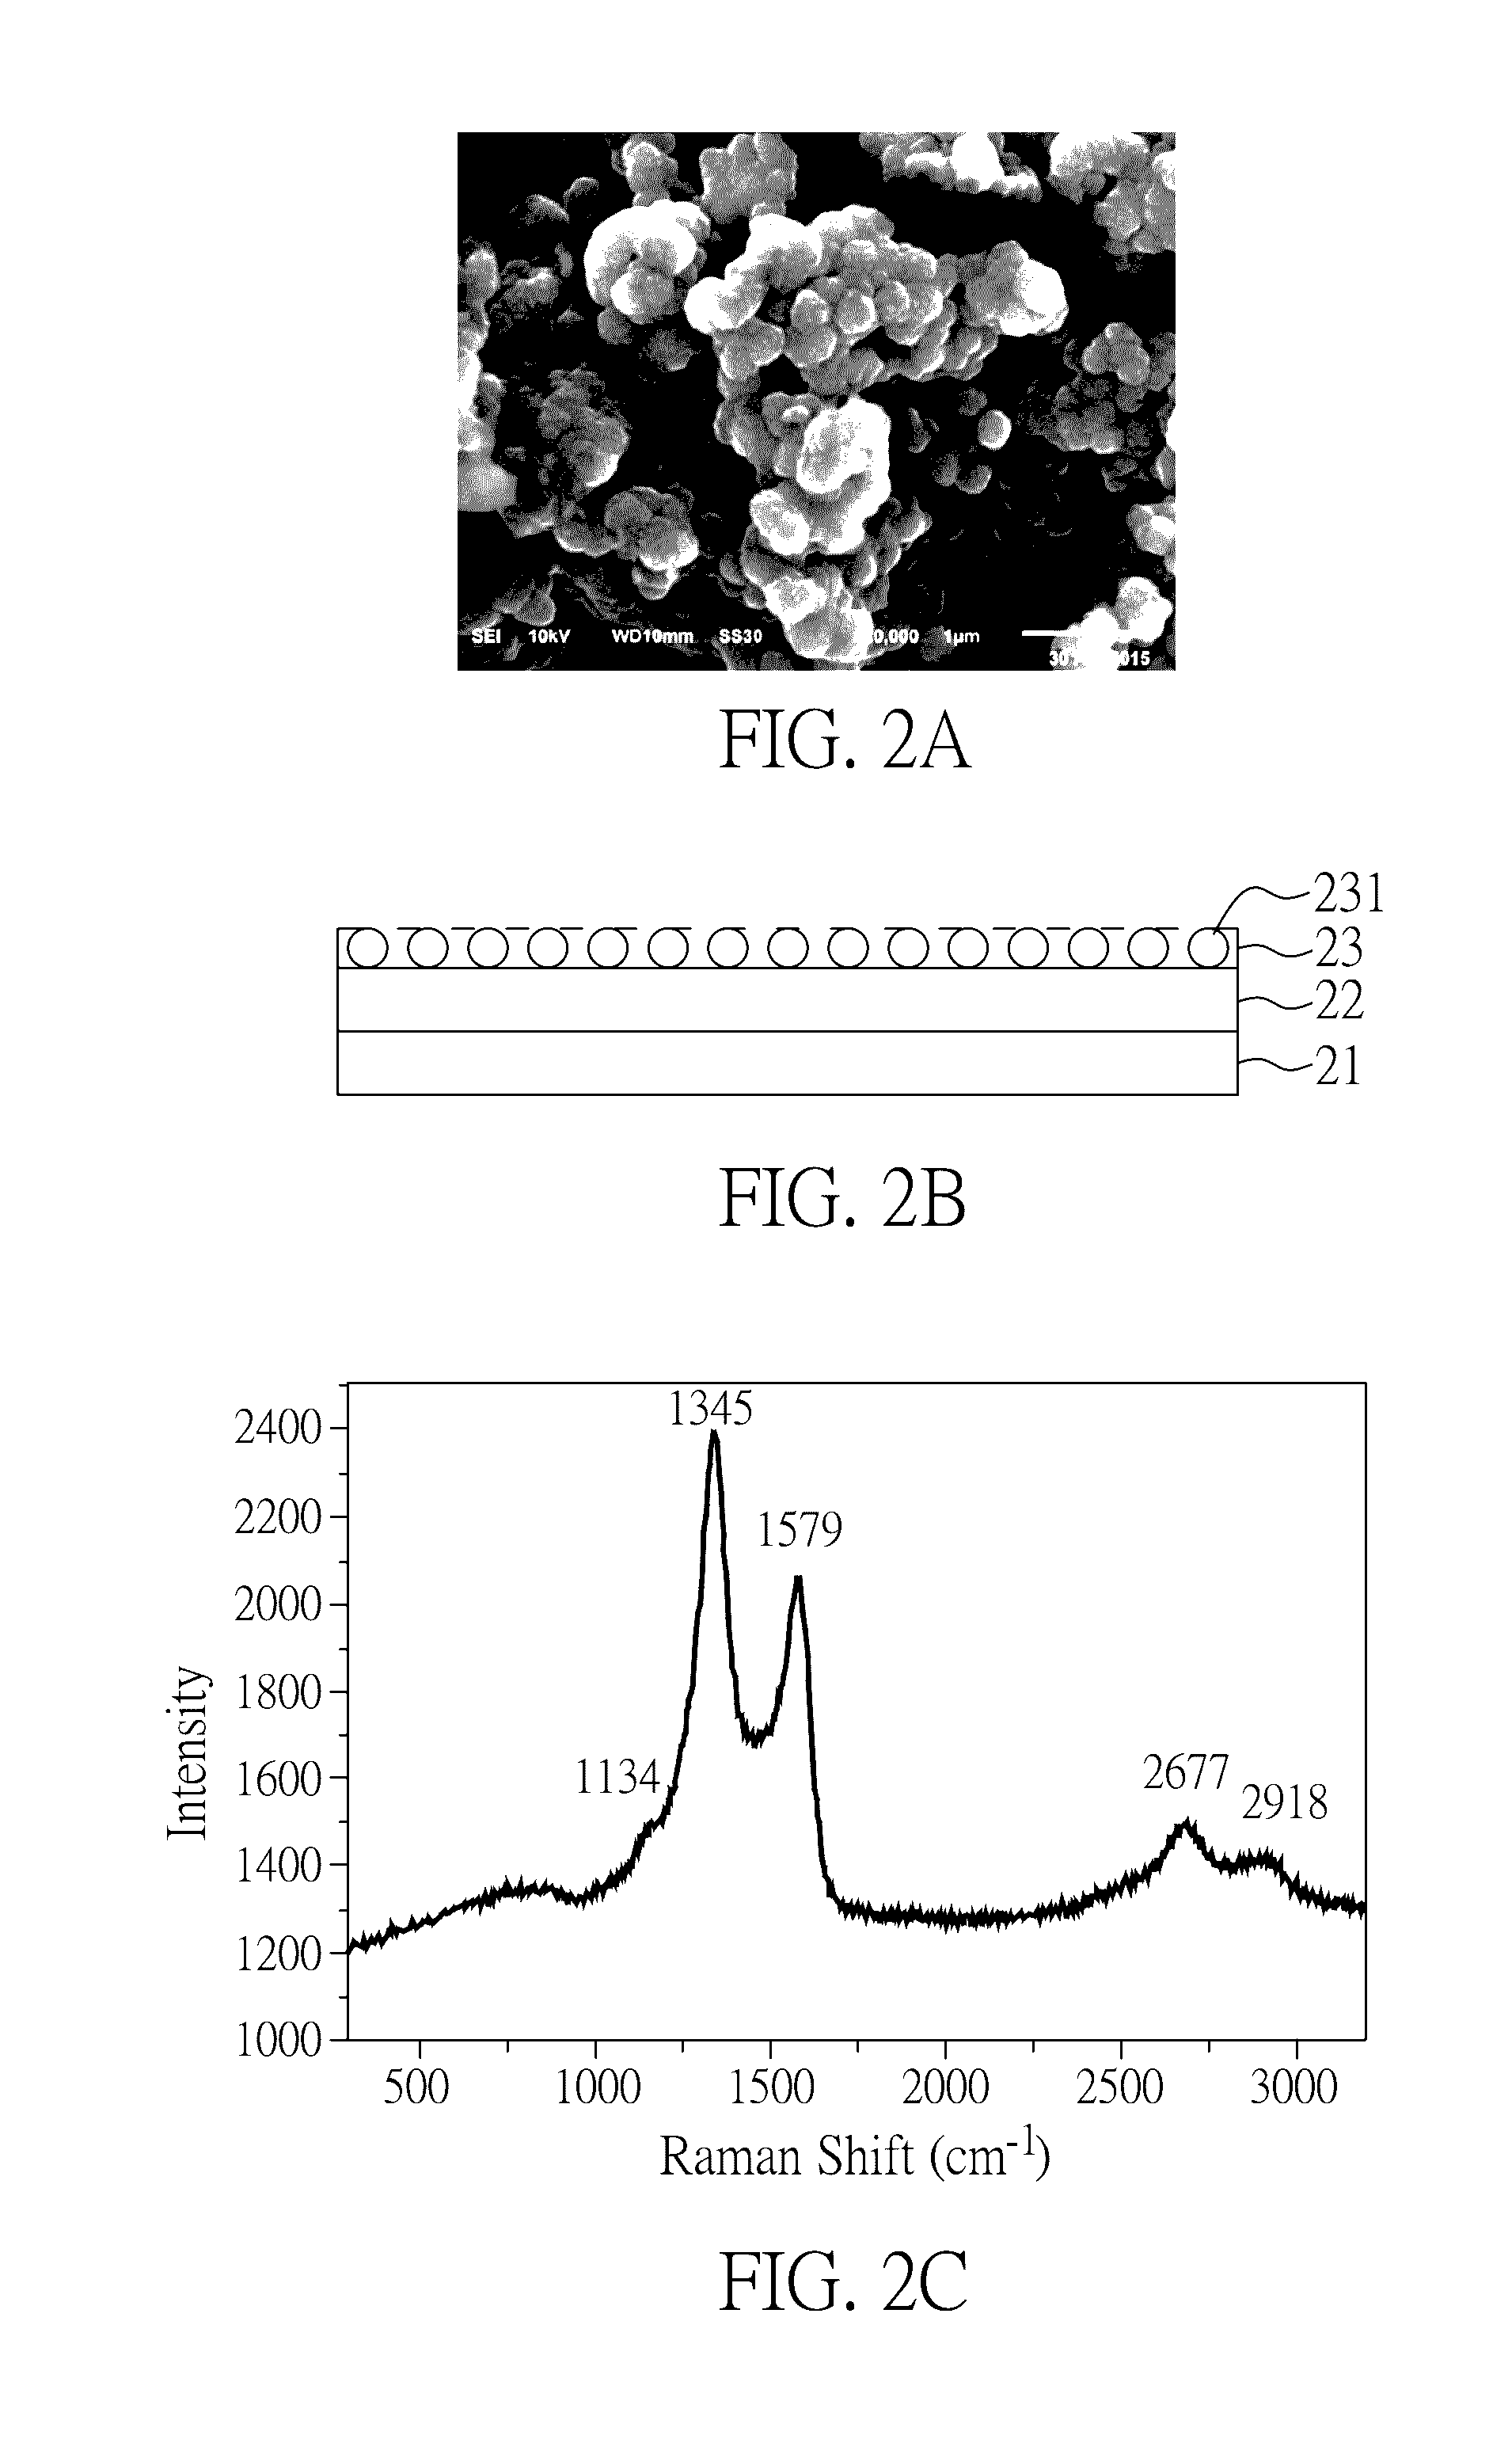 Composite electrode material and method for manufacturing the same